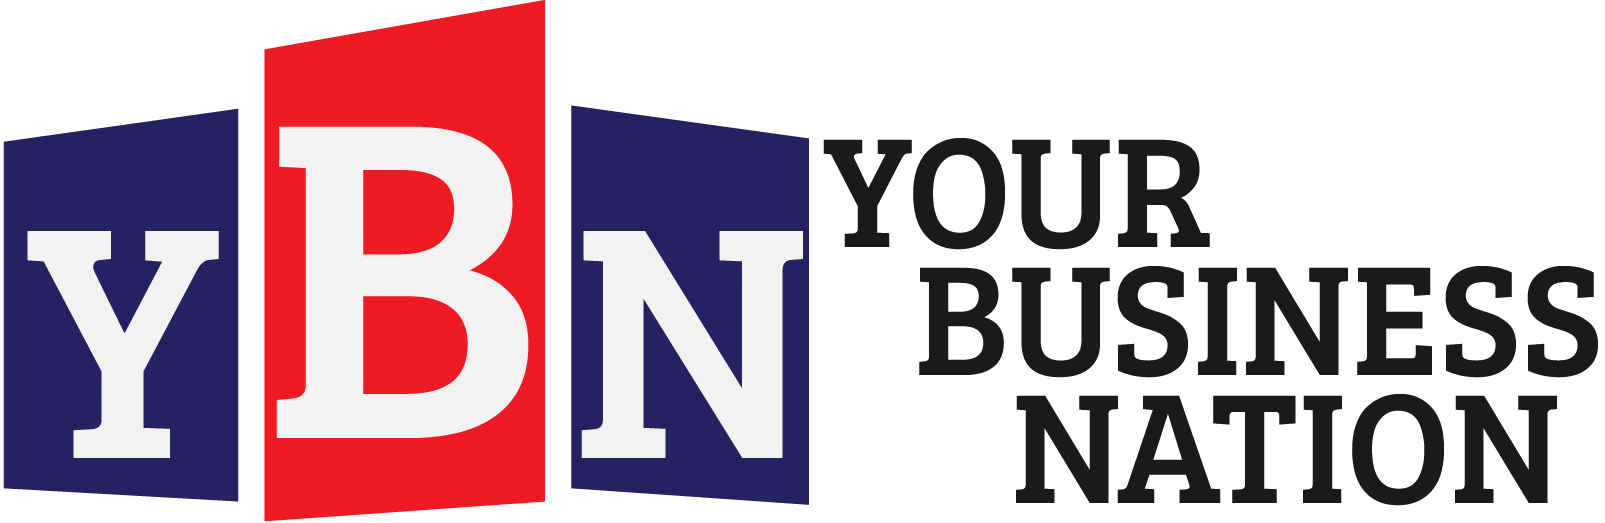 Your Business Nation